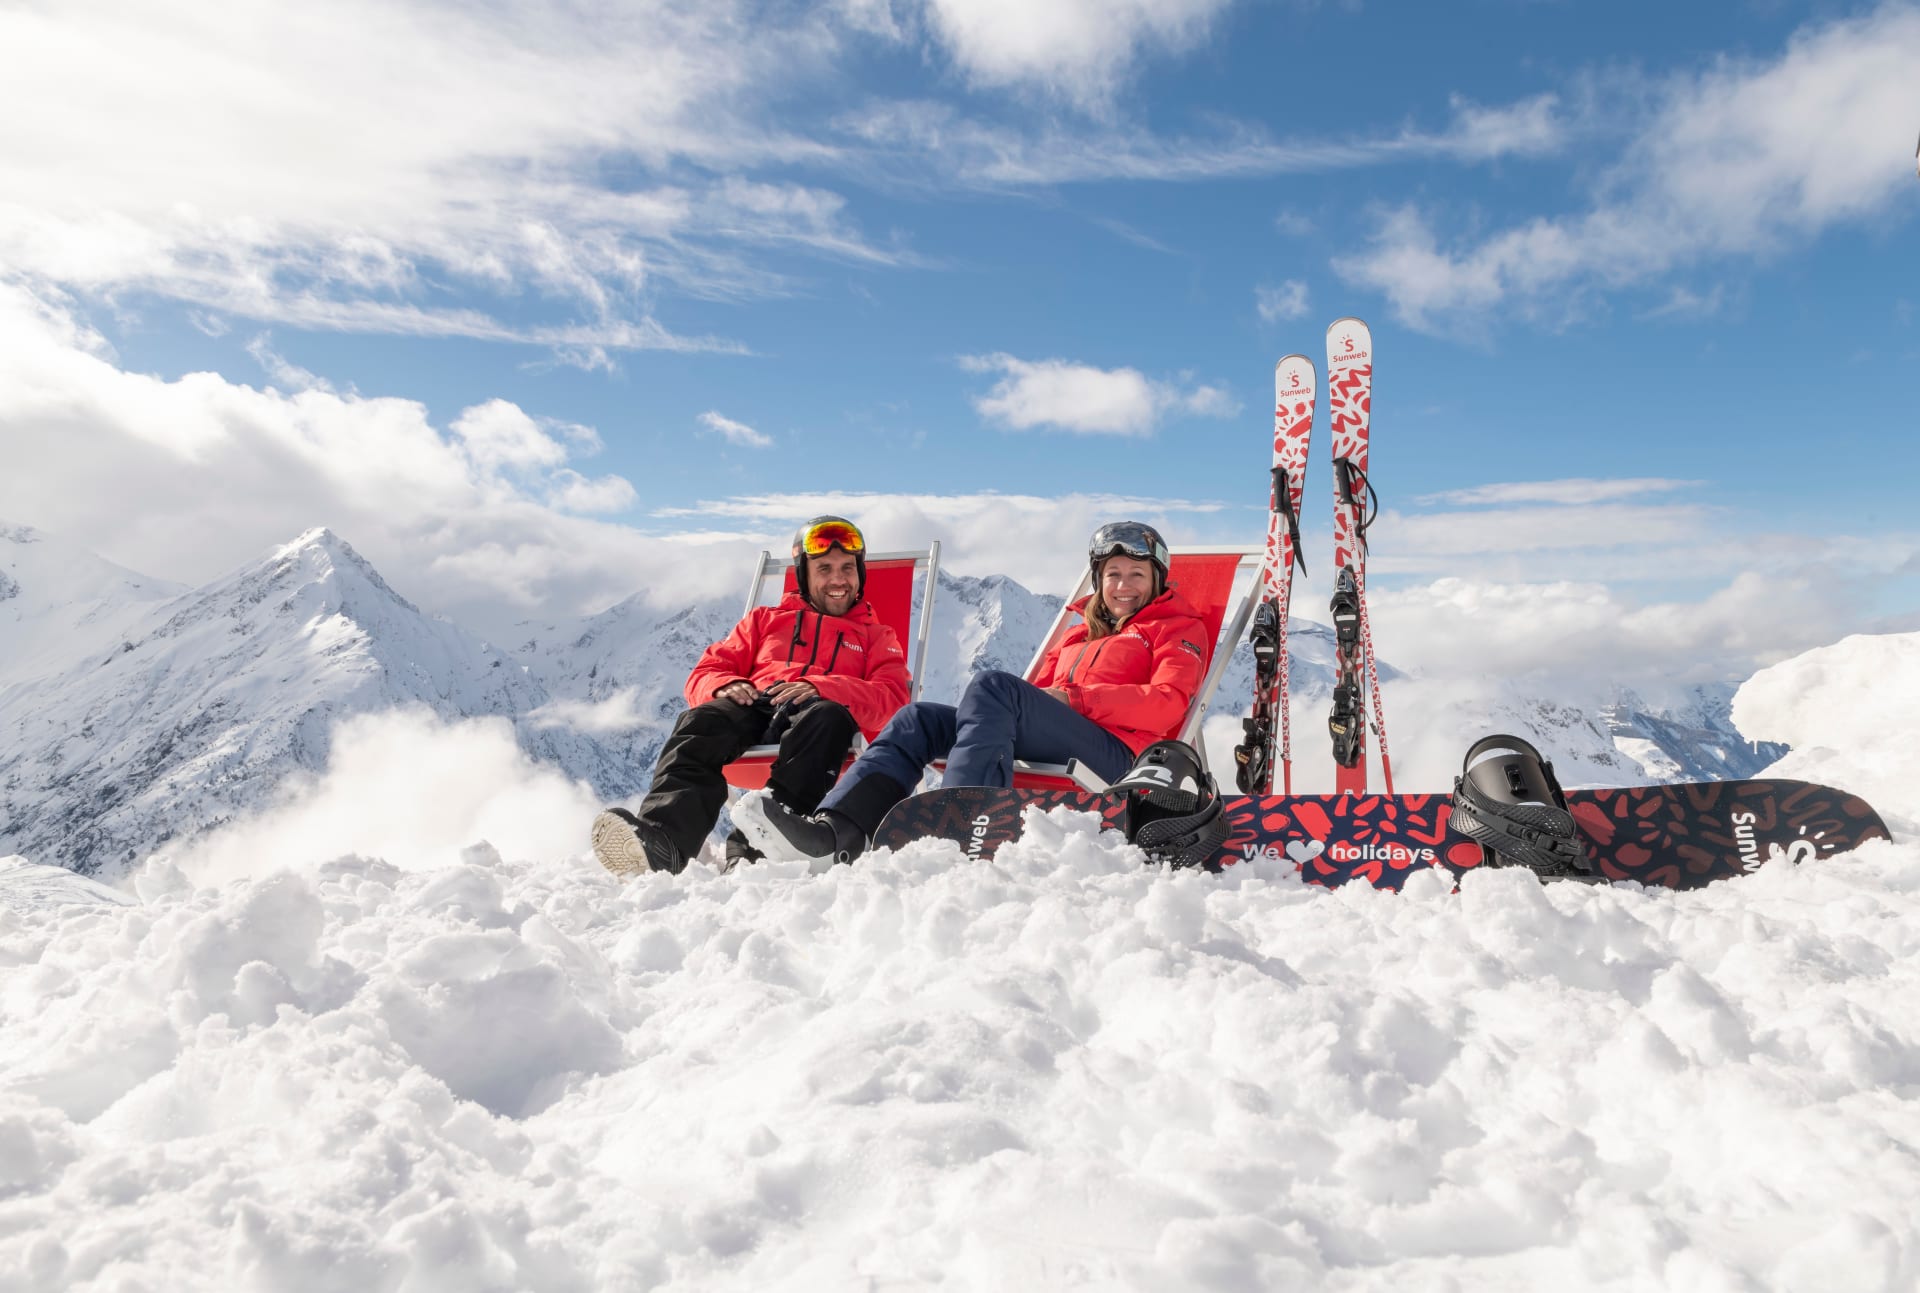 Winter guides on top of a snowy mountain with their ski and snowboard